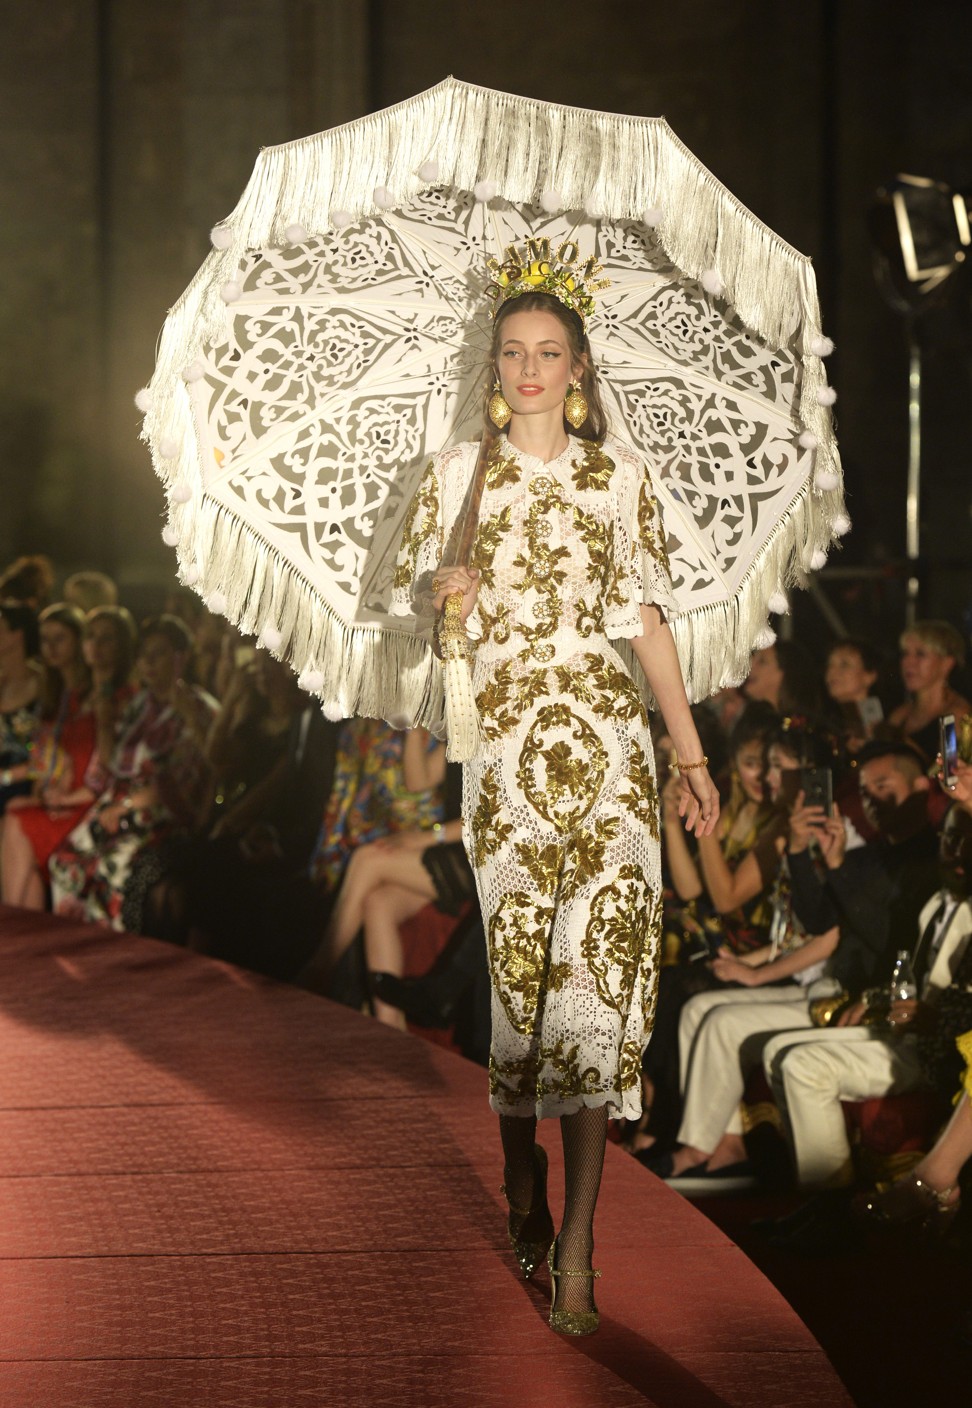 Model during the parade of Dolce and Gabbana in Pretoria Square in Palermo, Sicily. Photo: Handout